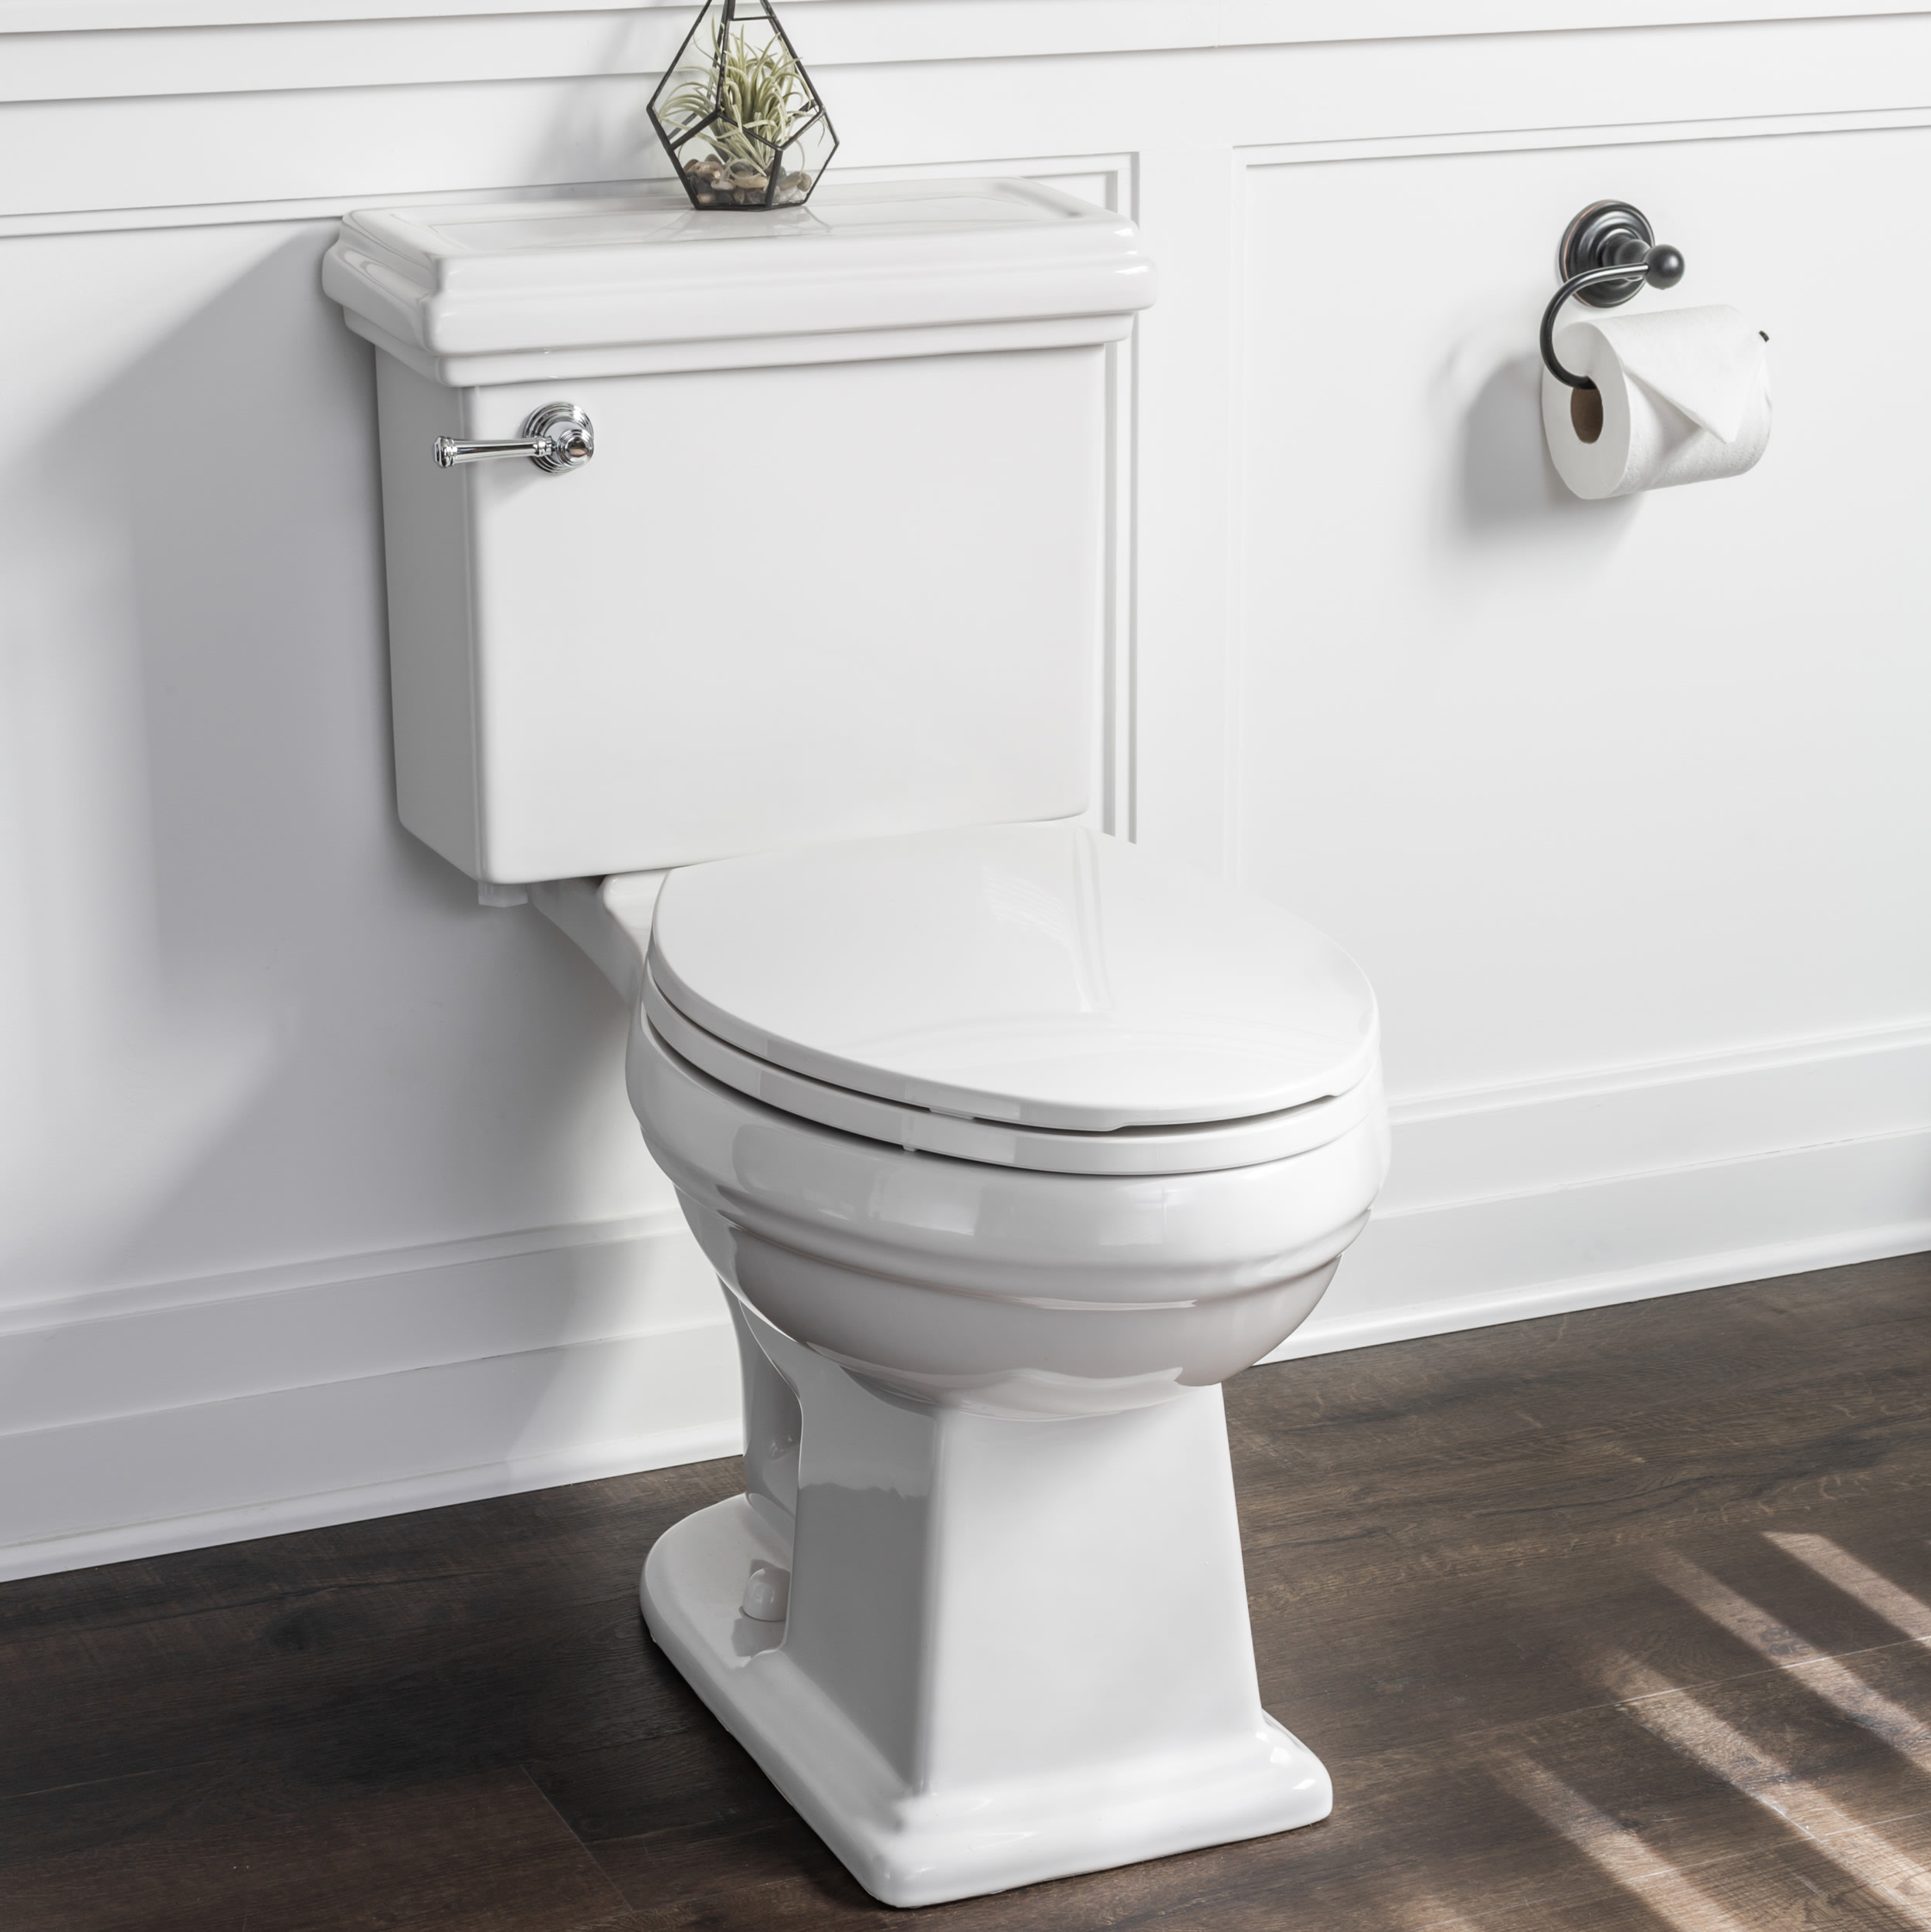 Miseno MNO120C 1.28 GPF Hight Efficiency One-piece Elongated Chair Height Toilet for sale online 